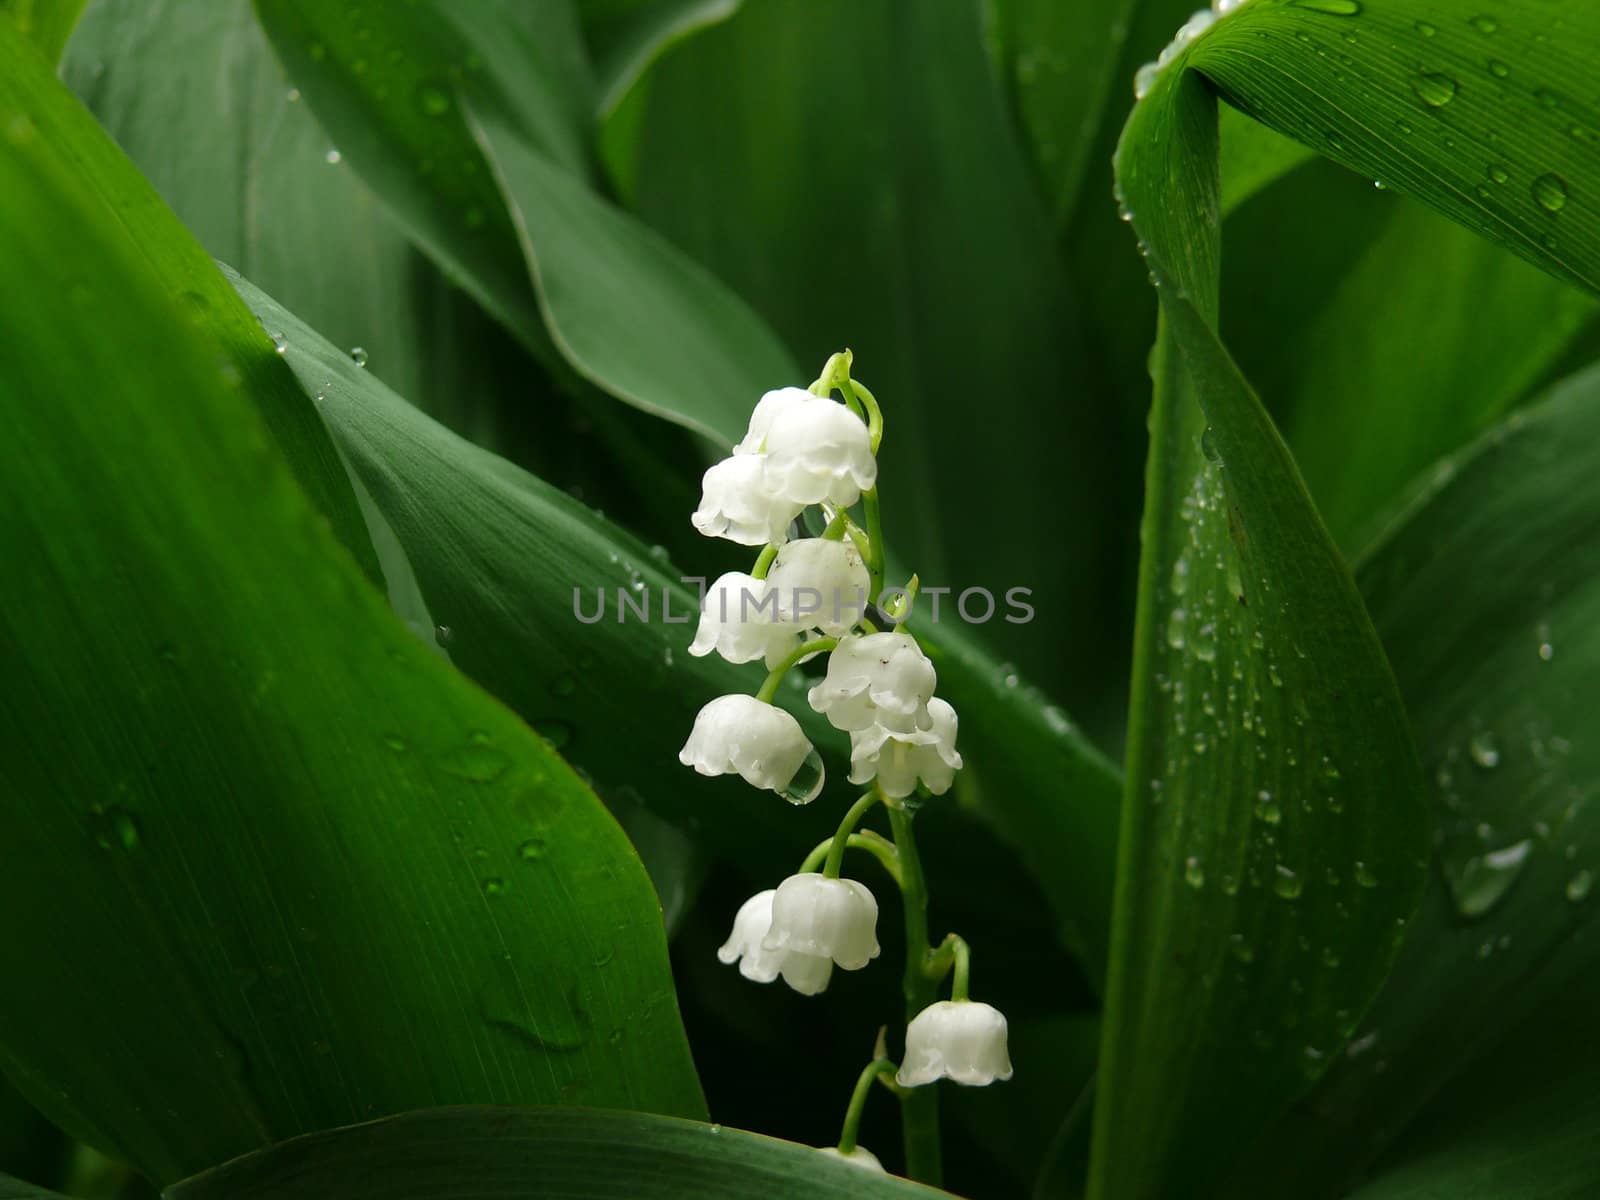 lily of the valley by Stoyanov